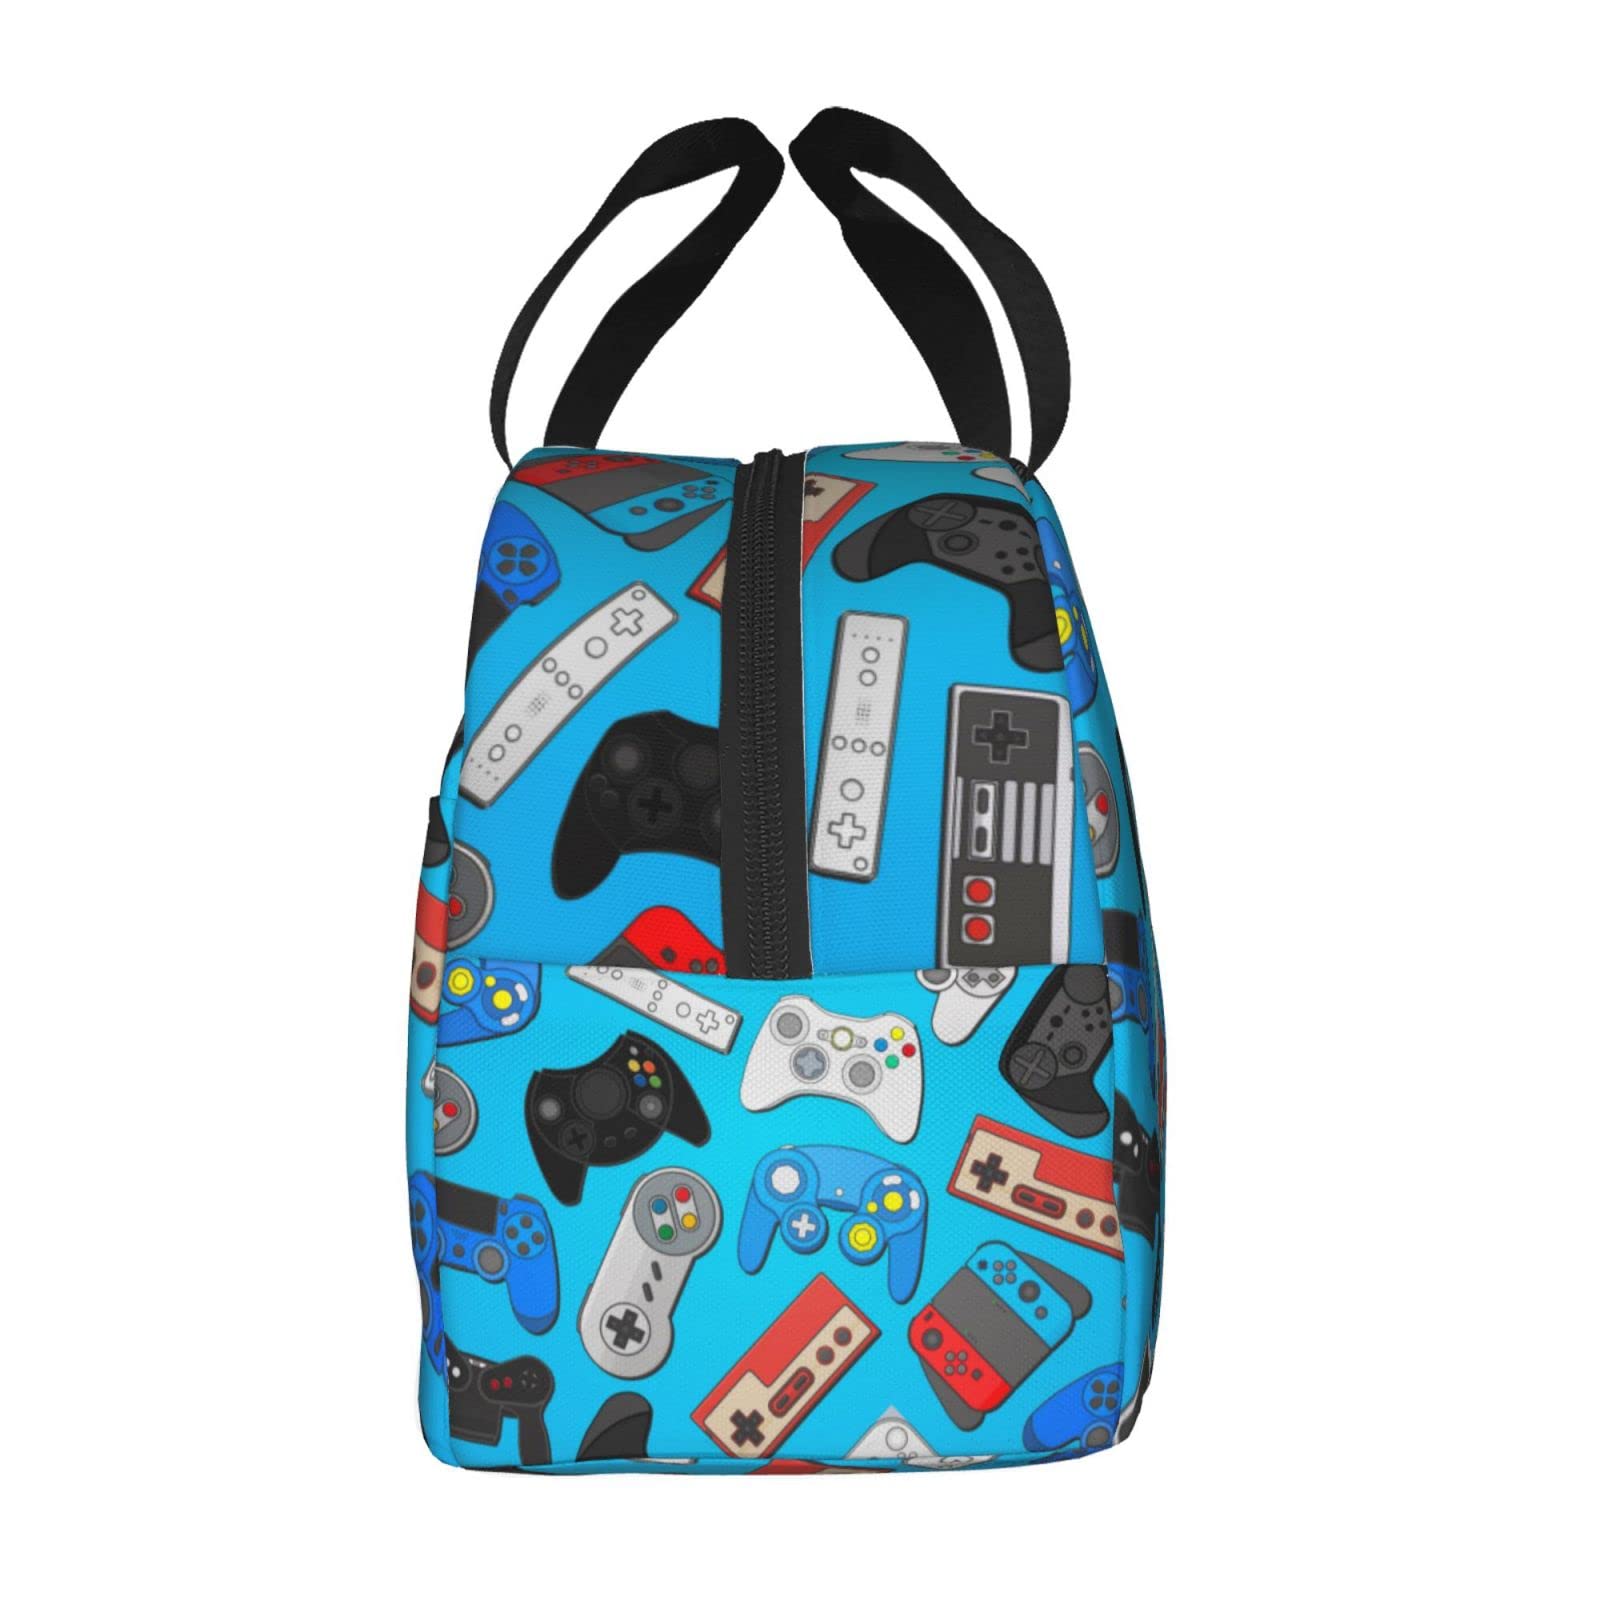 Echoserein Video Game Fun Gamer Lunch Bag Insulated Lunch Box Reusable Lunchbox Waterproof Portable Lunch Tote For Boys Men Adult